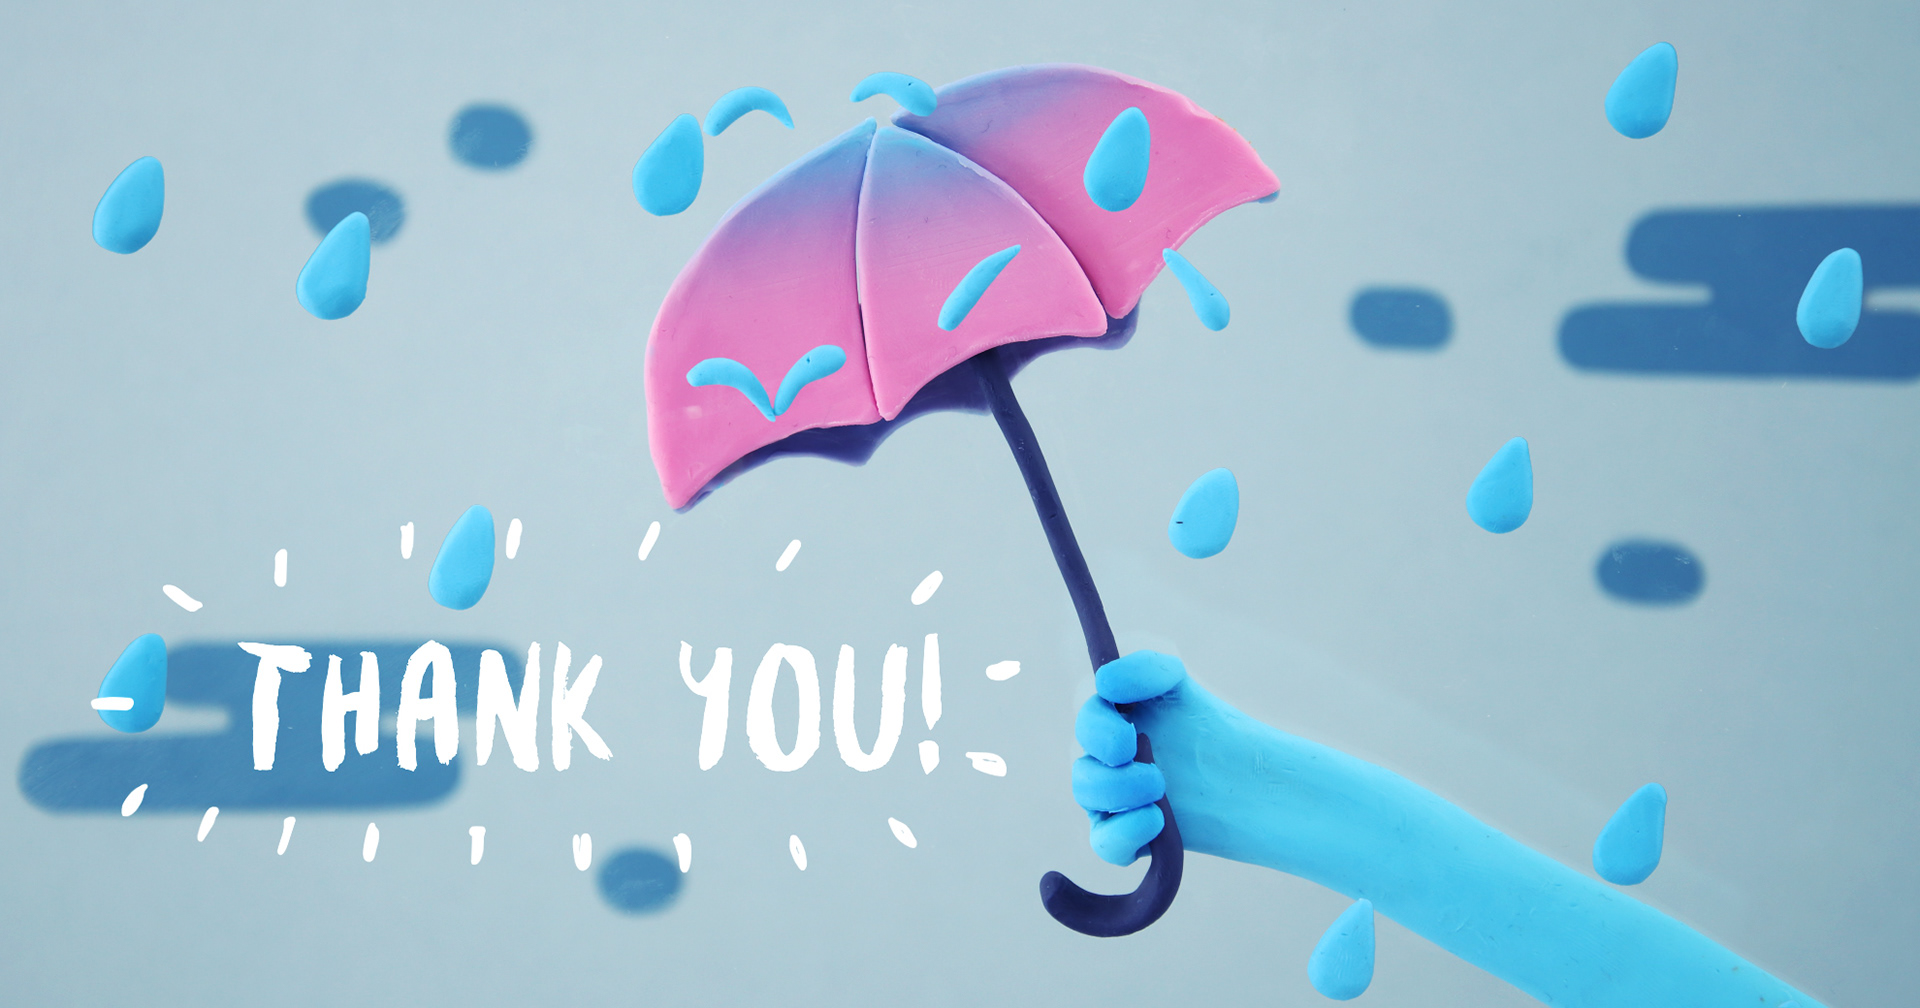 Stop motion animated card: Thank You. | Behance